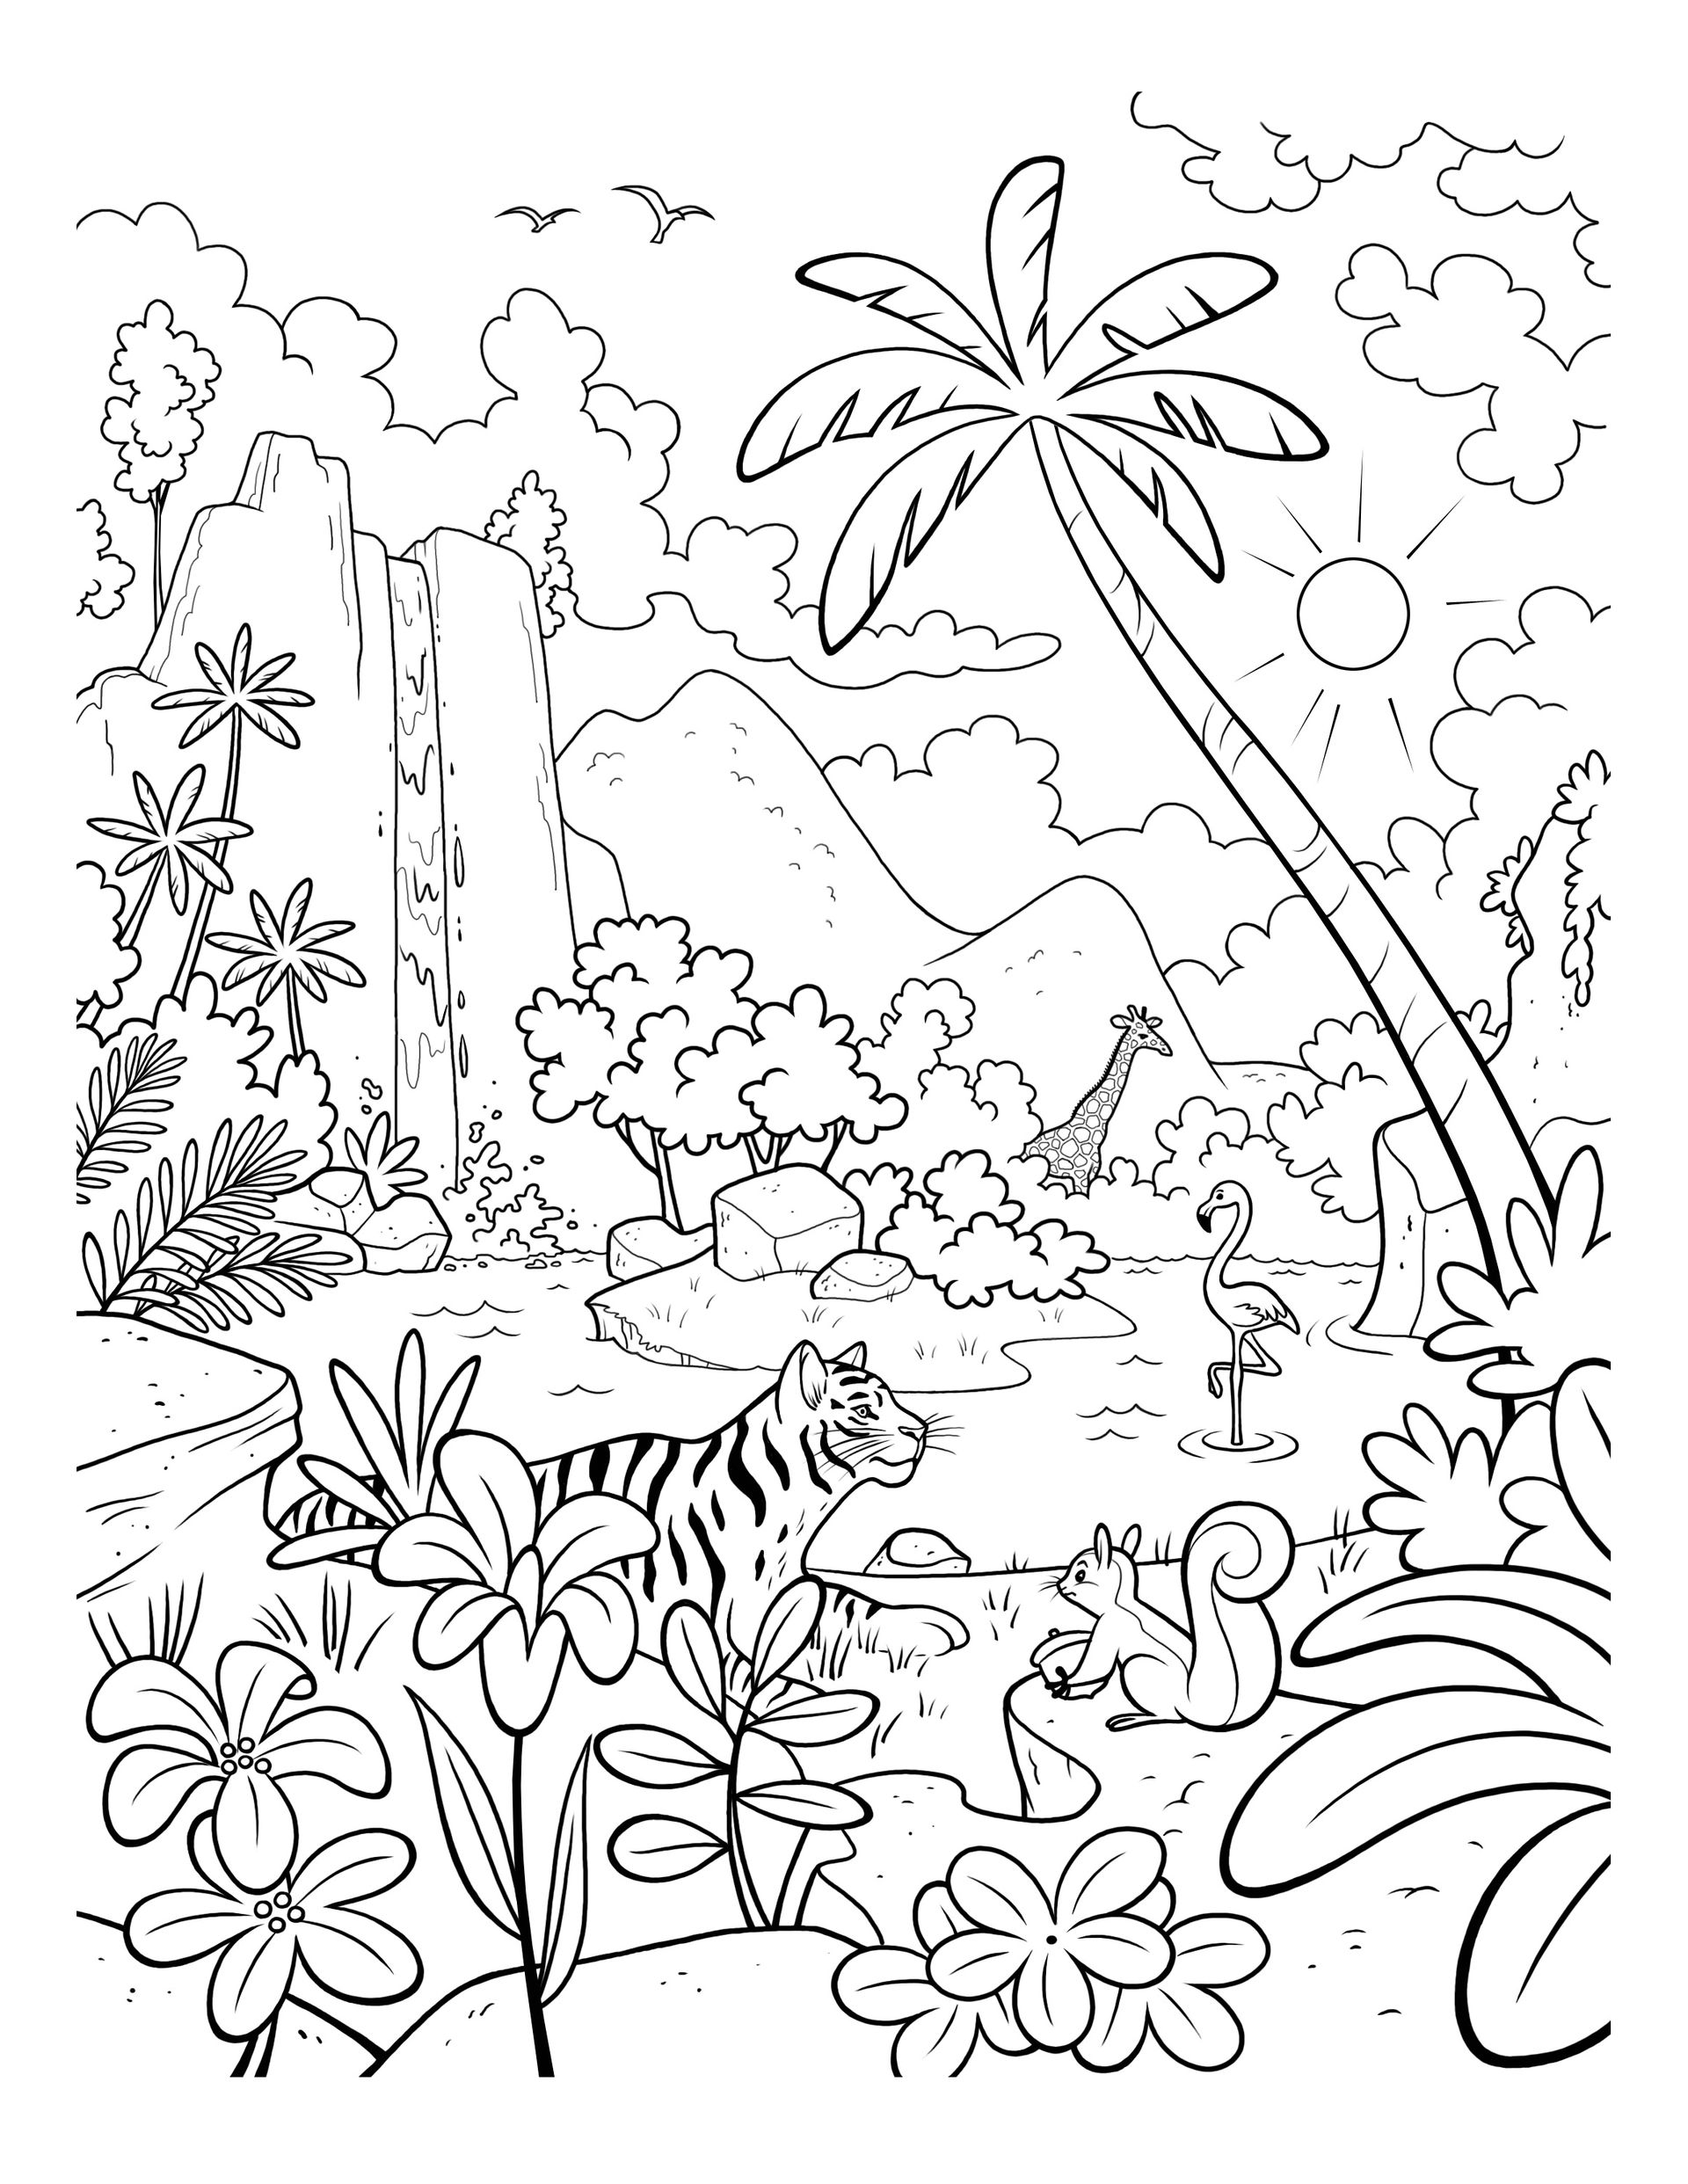 A jungle scene with a waterfall, palm trees, a giraffe, a flamingo, a tiger, and a squirrel.